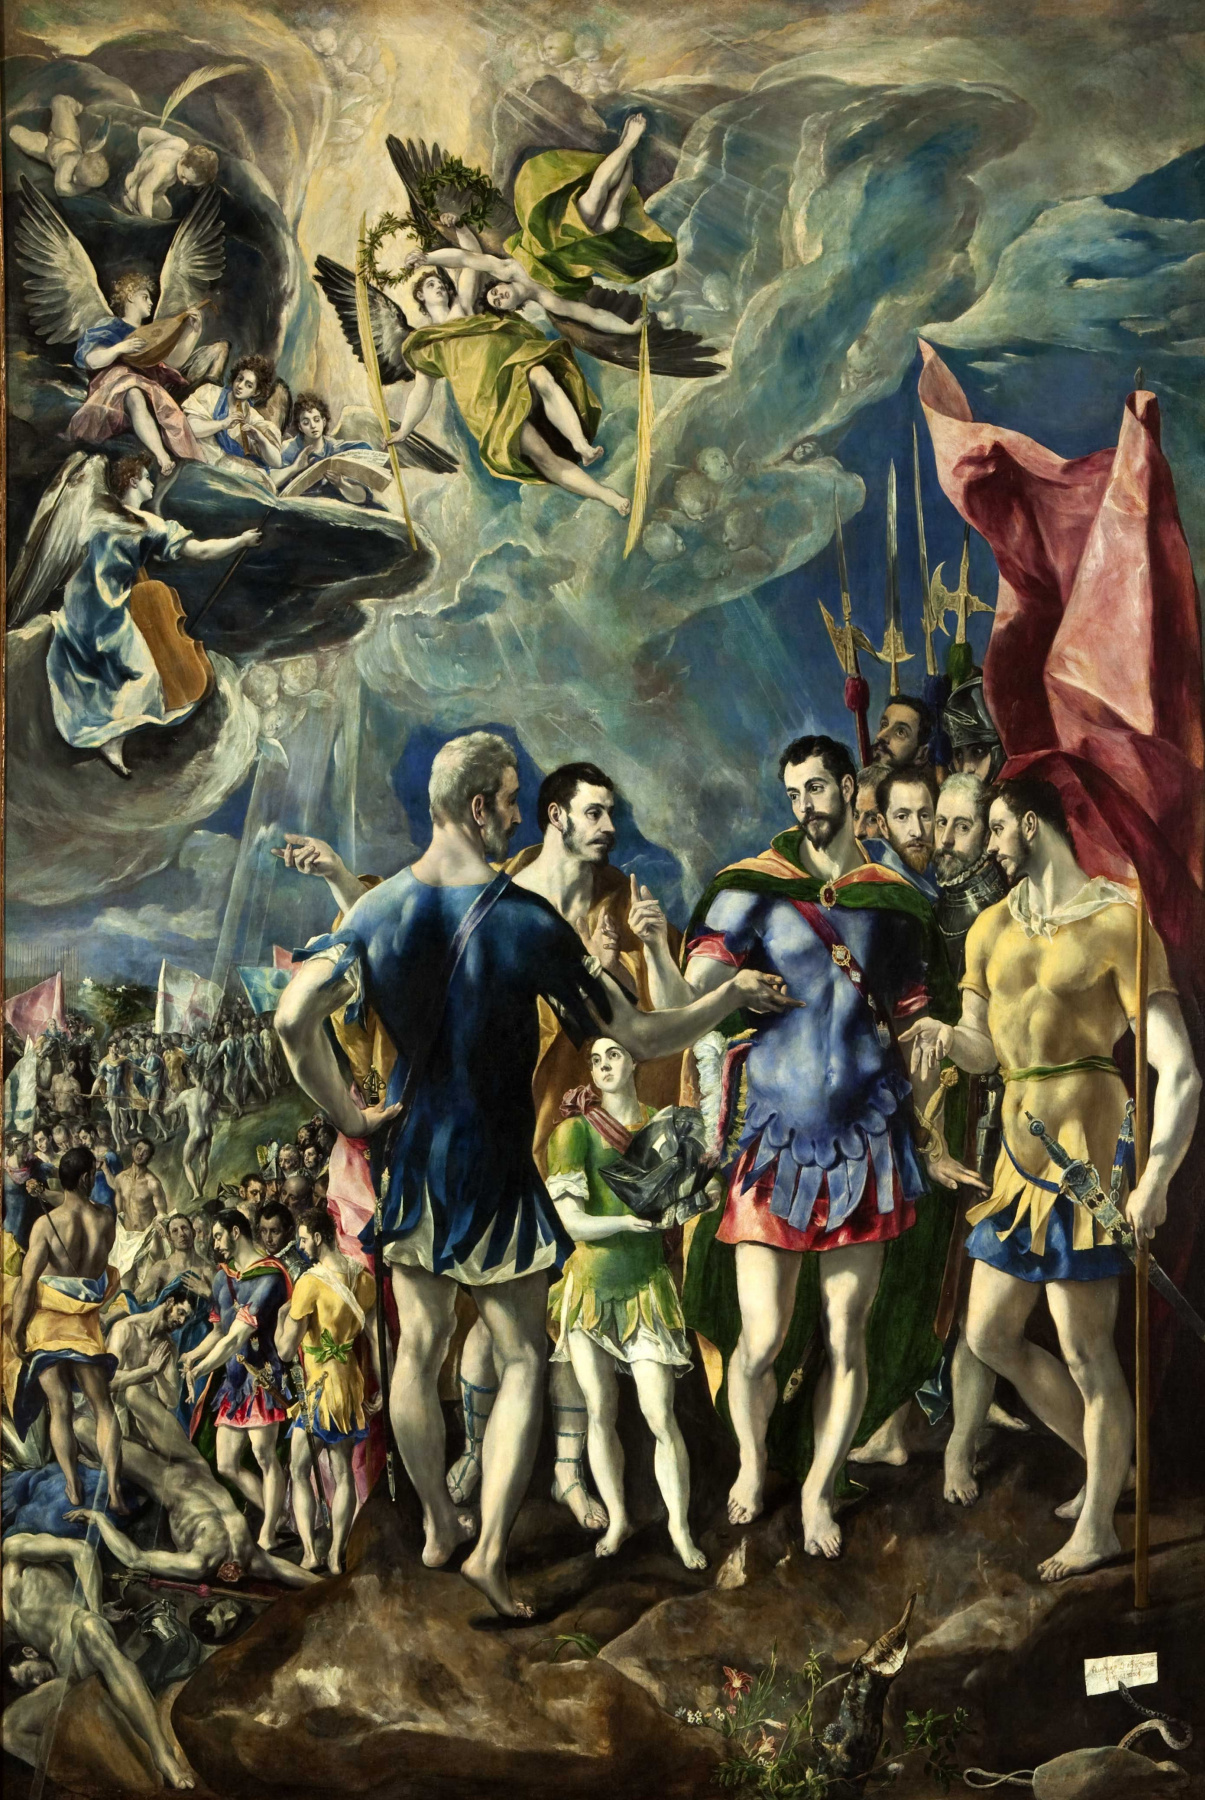 Domenico Theotokopoulos (El Greco). The martyrdom of St. Mauritius and the Theban Legion